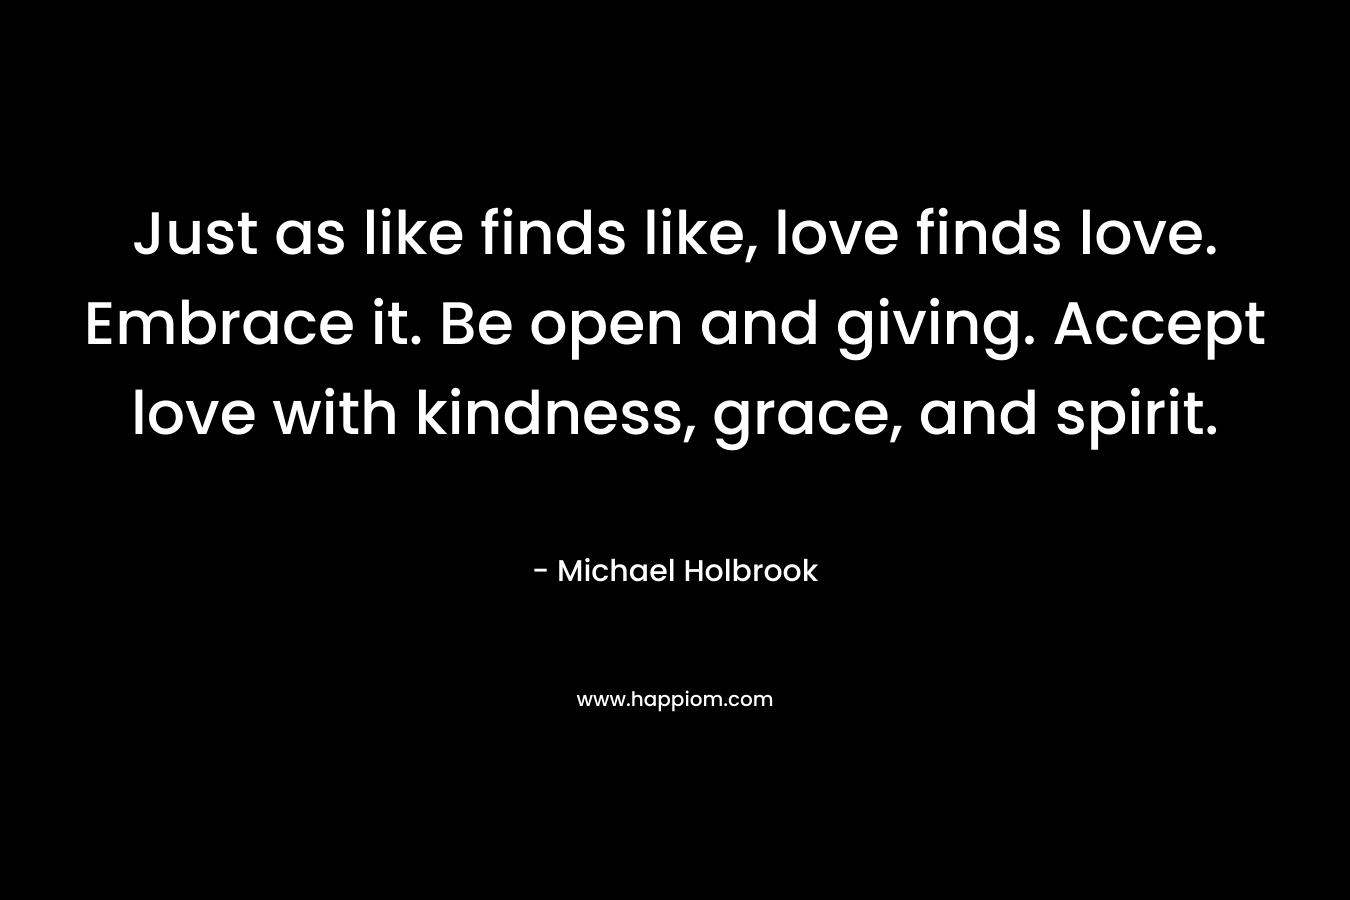 Just as like finds like, love finds love. Embrace it. Be open and giving. Accept love with kindness, grace, and spirit. – Michael Holbrook